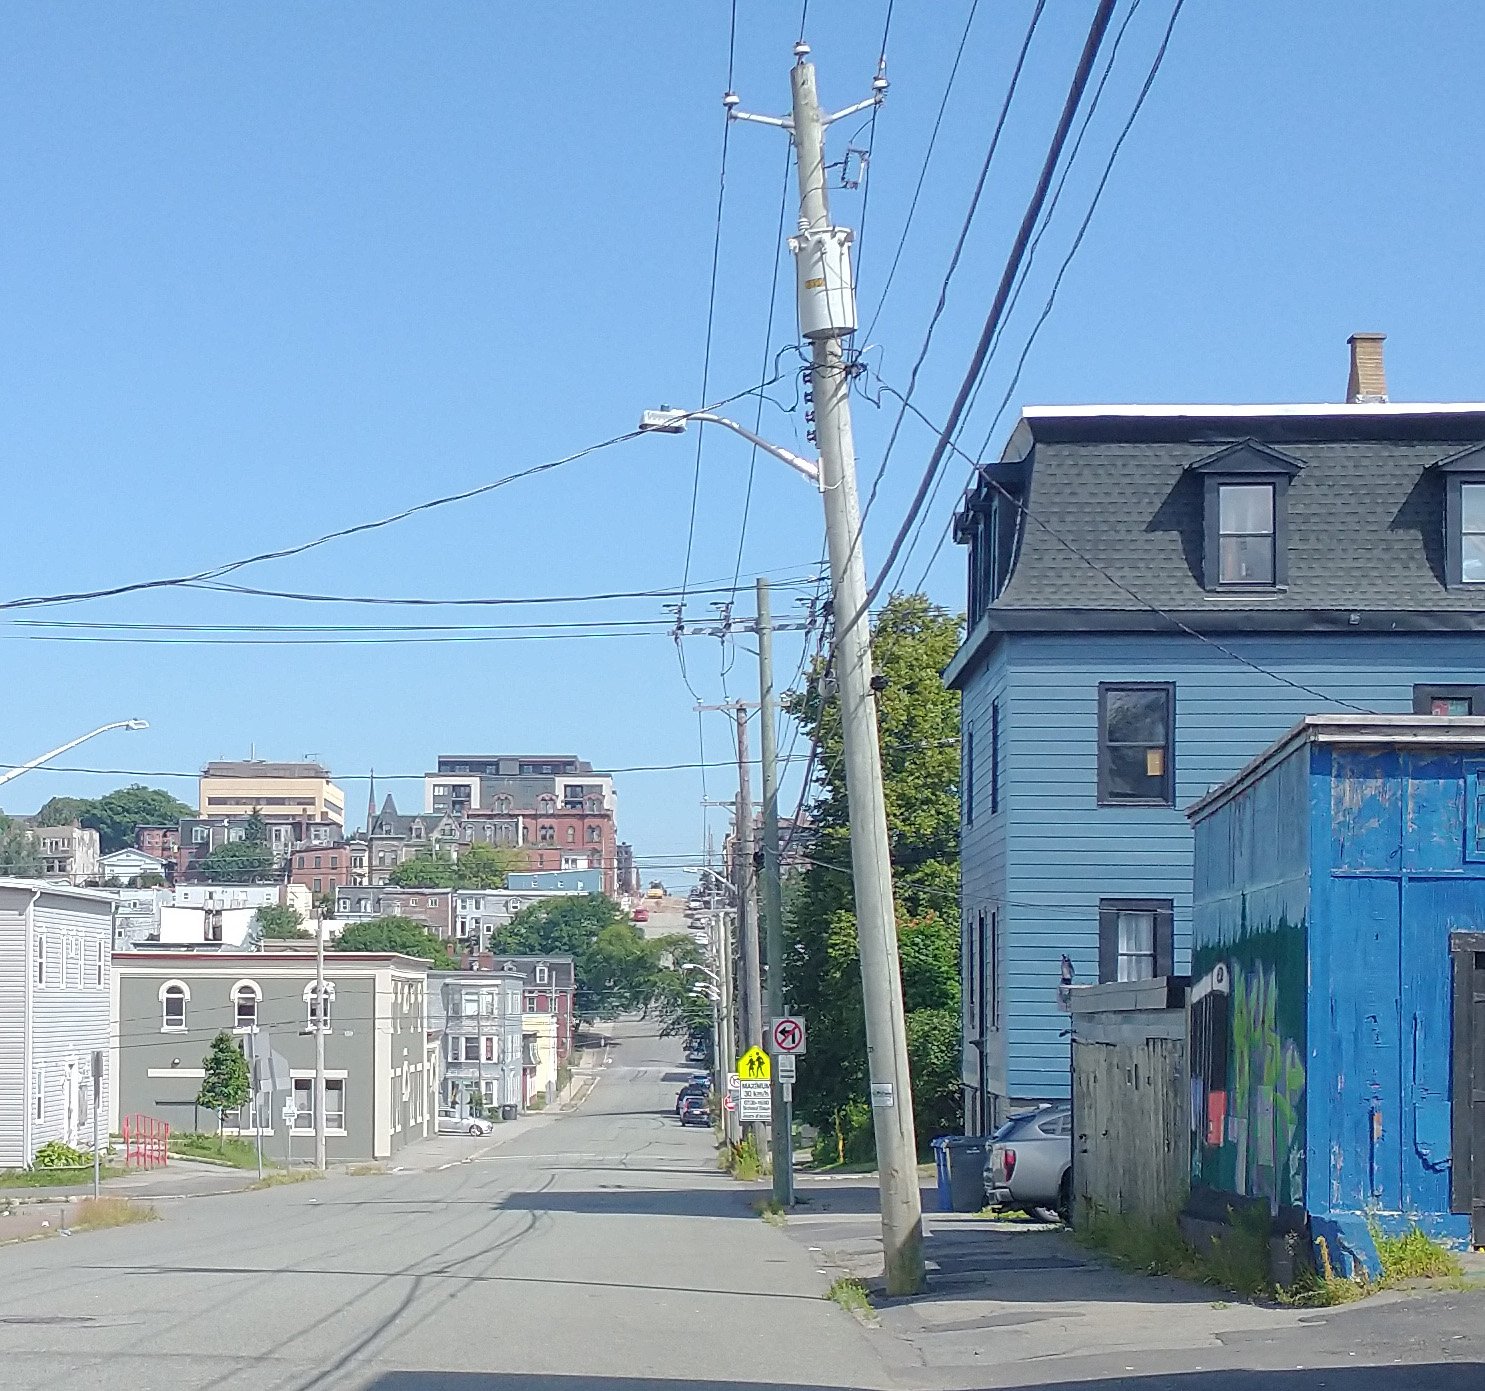 The parts of the city I saw were definitely less well preserved and cute then Saint John in Newfoundland. Also change your name, there should only be one Saint John in Canada.